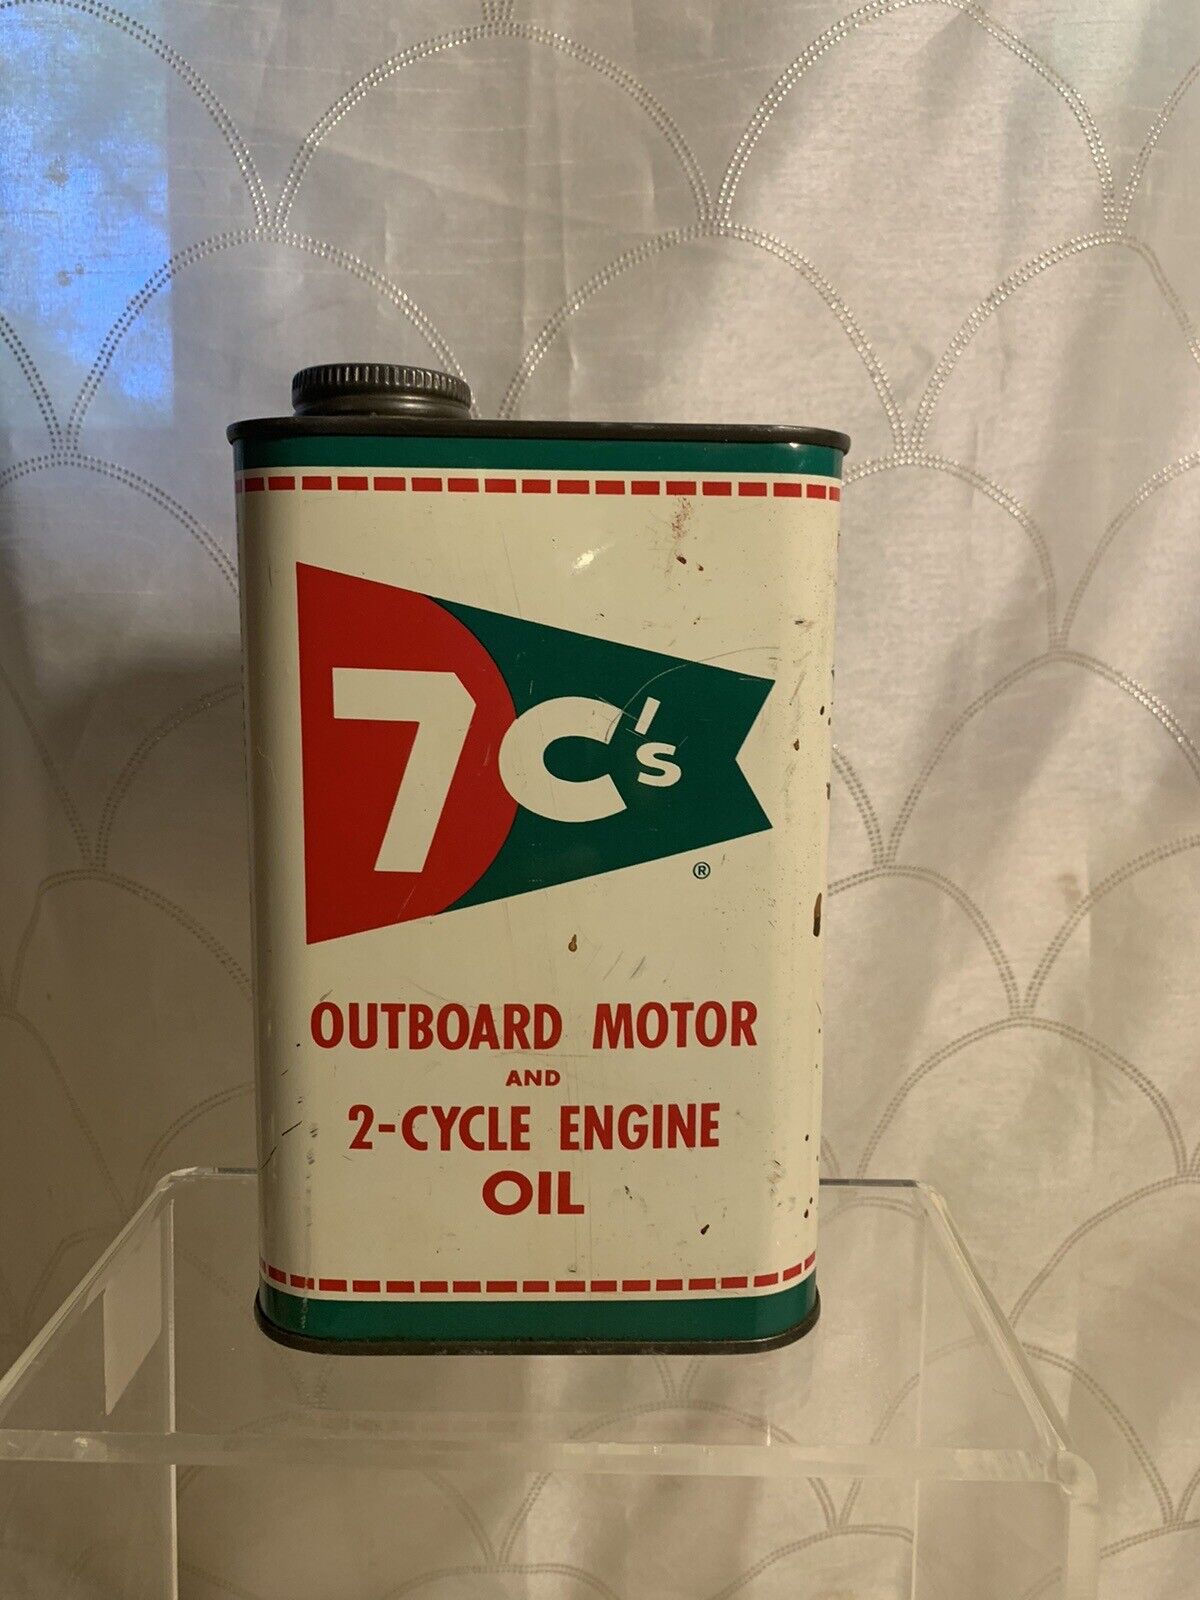 Vintage 7 c’s Outboard Motor and 2-Cycle Engine Oil Can half full